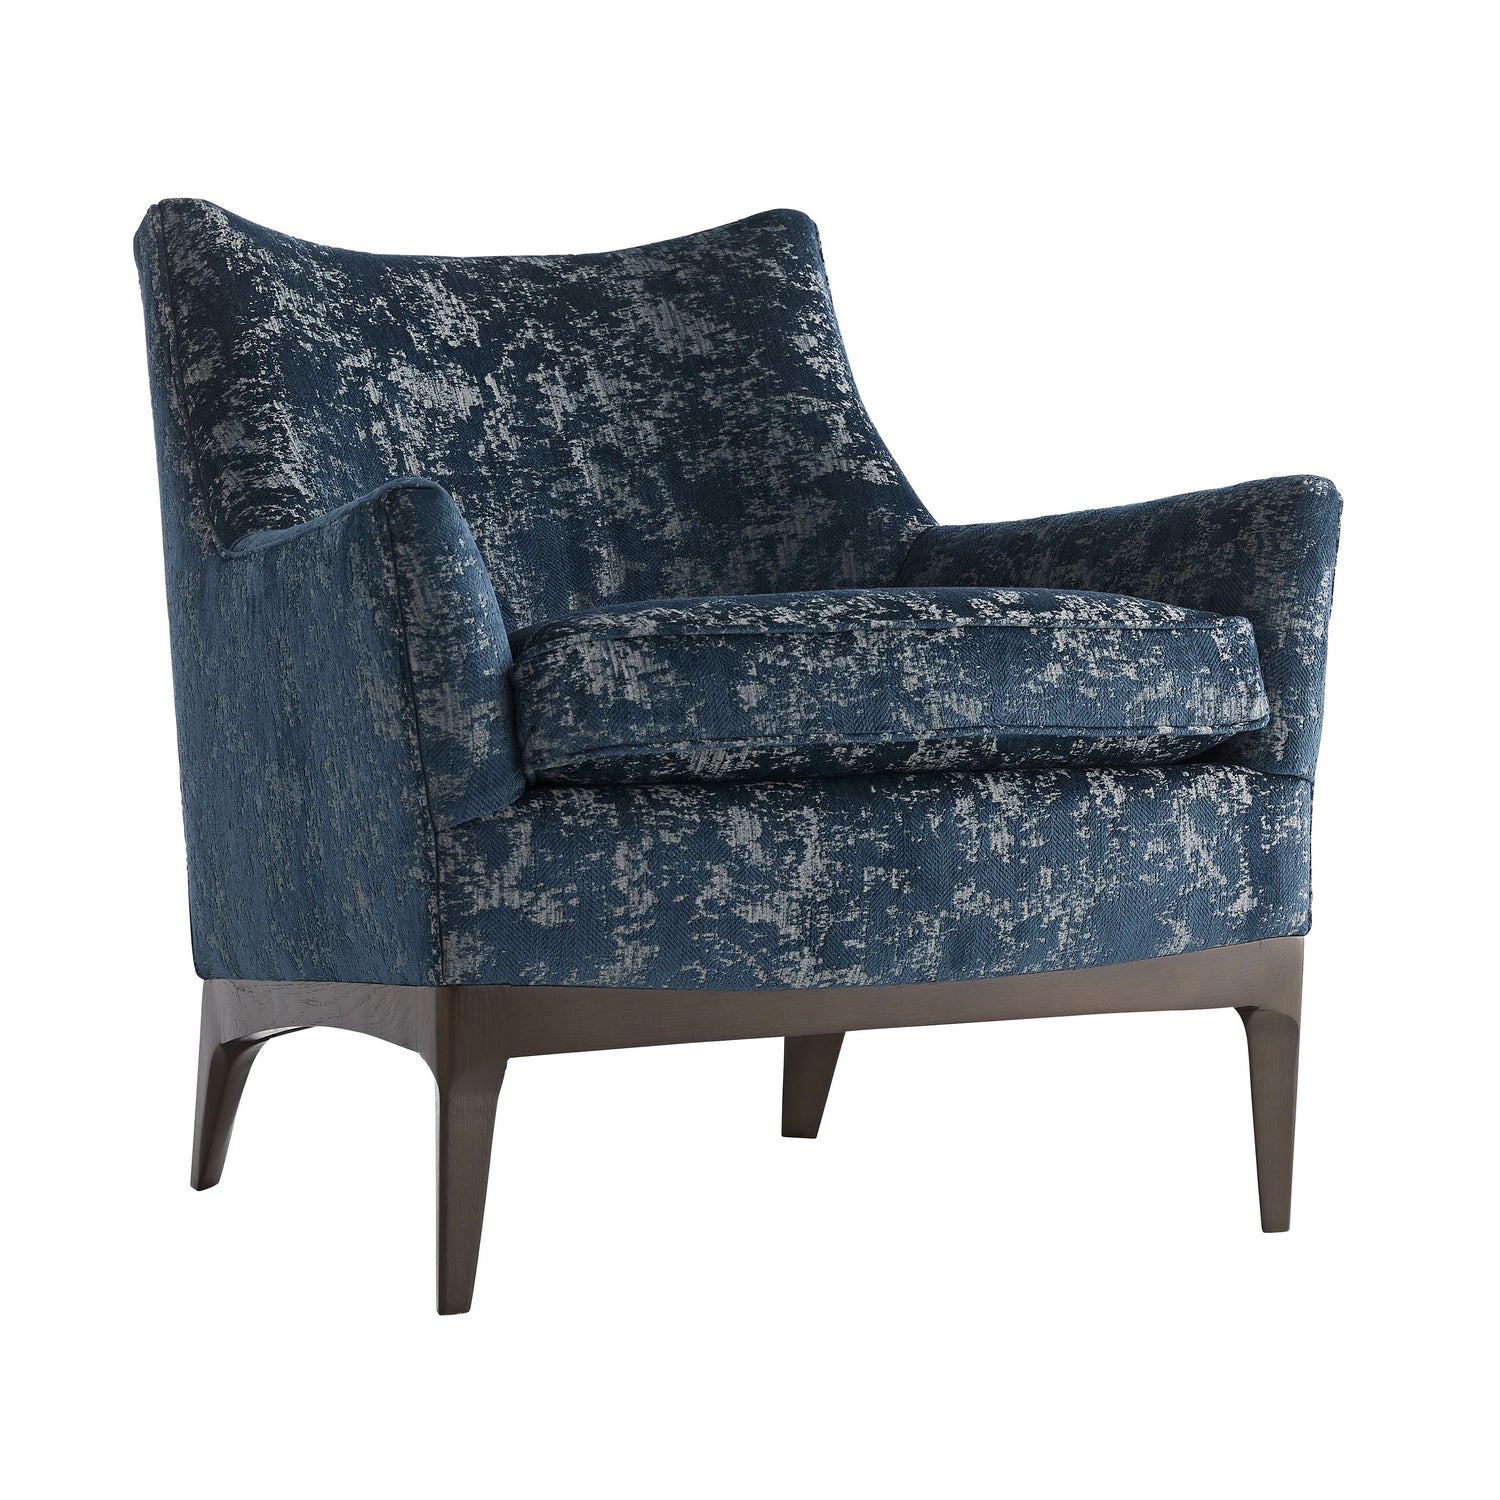 Chair from the Ferguson collection in Peacock Chenille finish